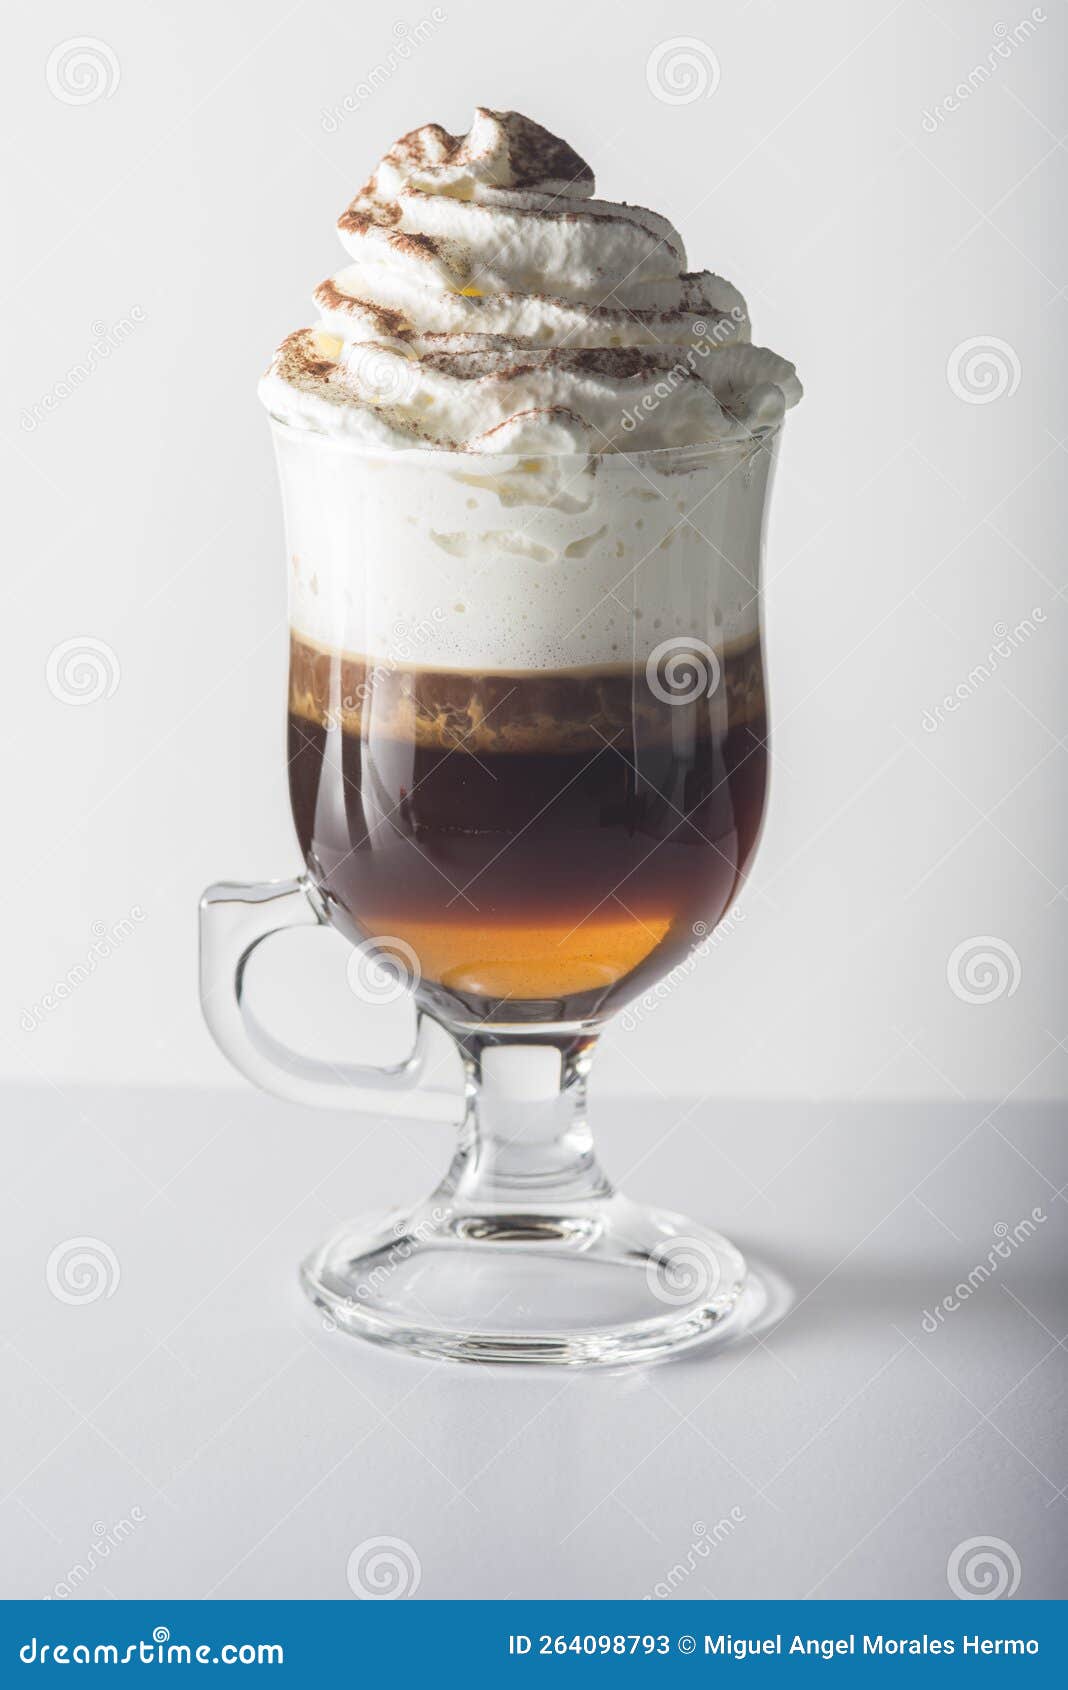 glass cup with handle containing coffee.